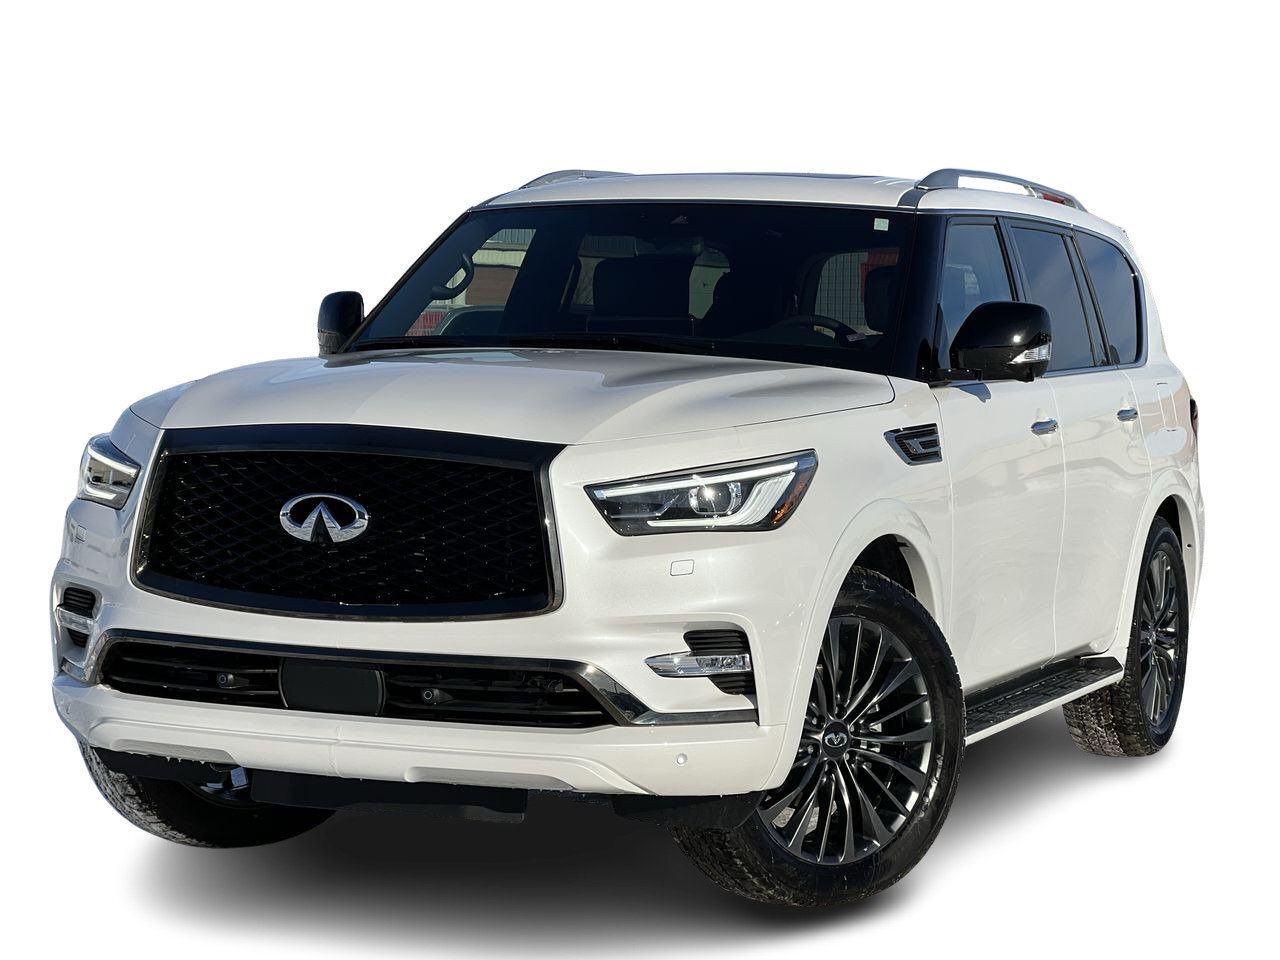 2023 Infiniti QX80 7 PASSENGER, ProACTIVE Manager Demo Clearance!